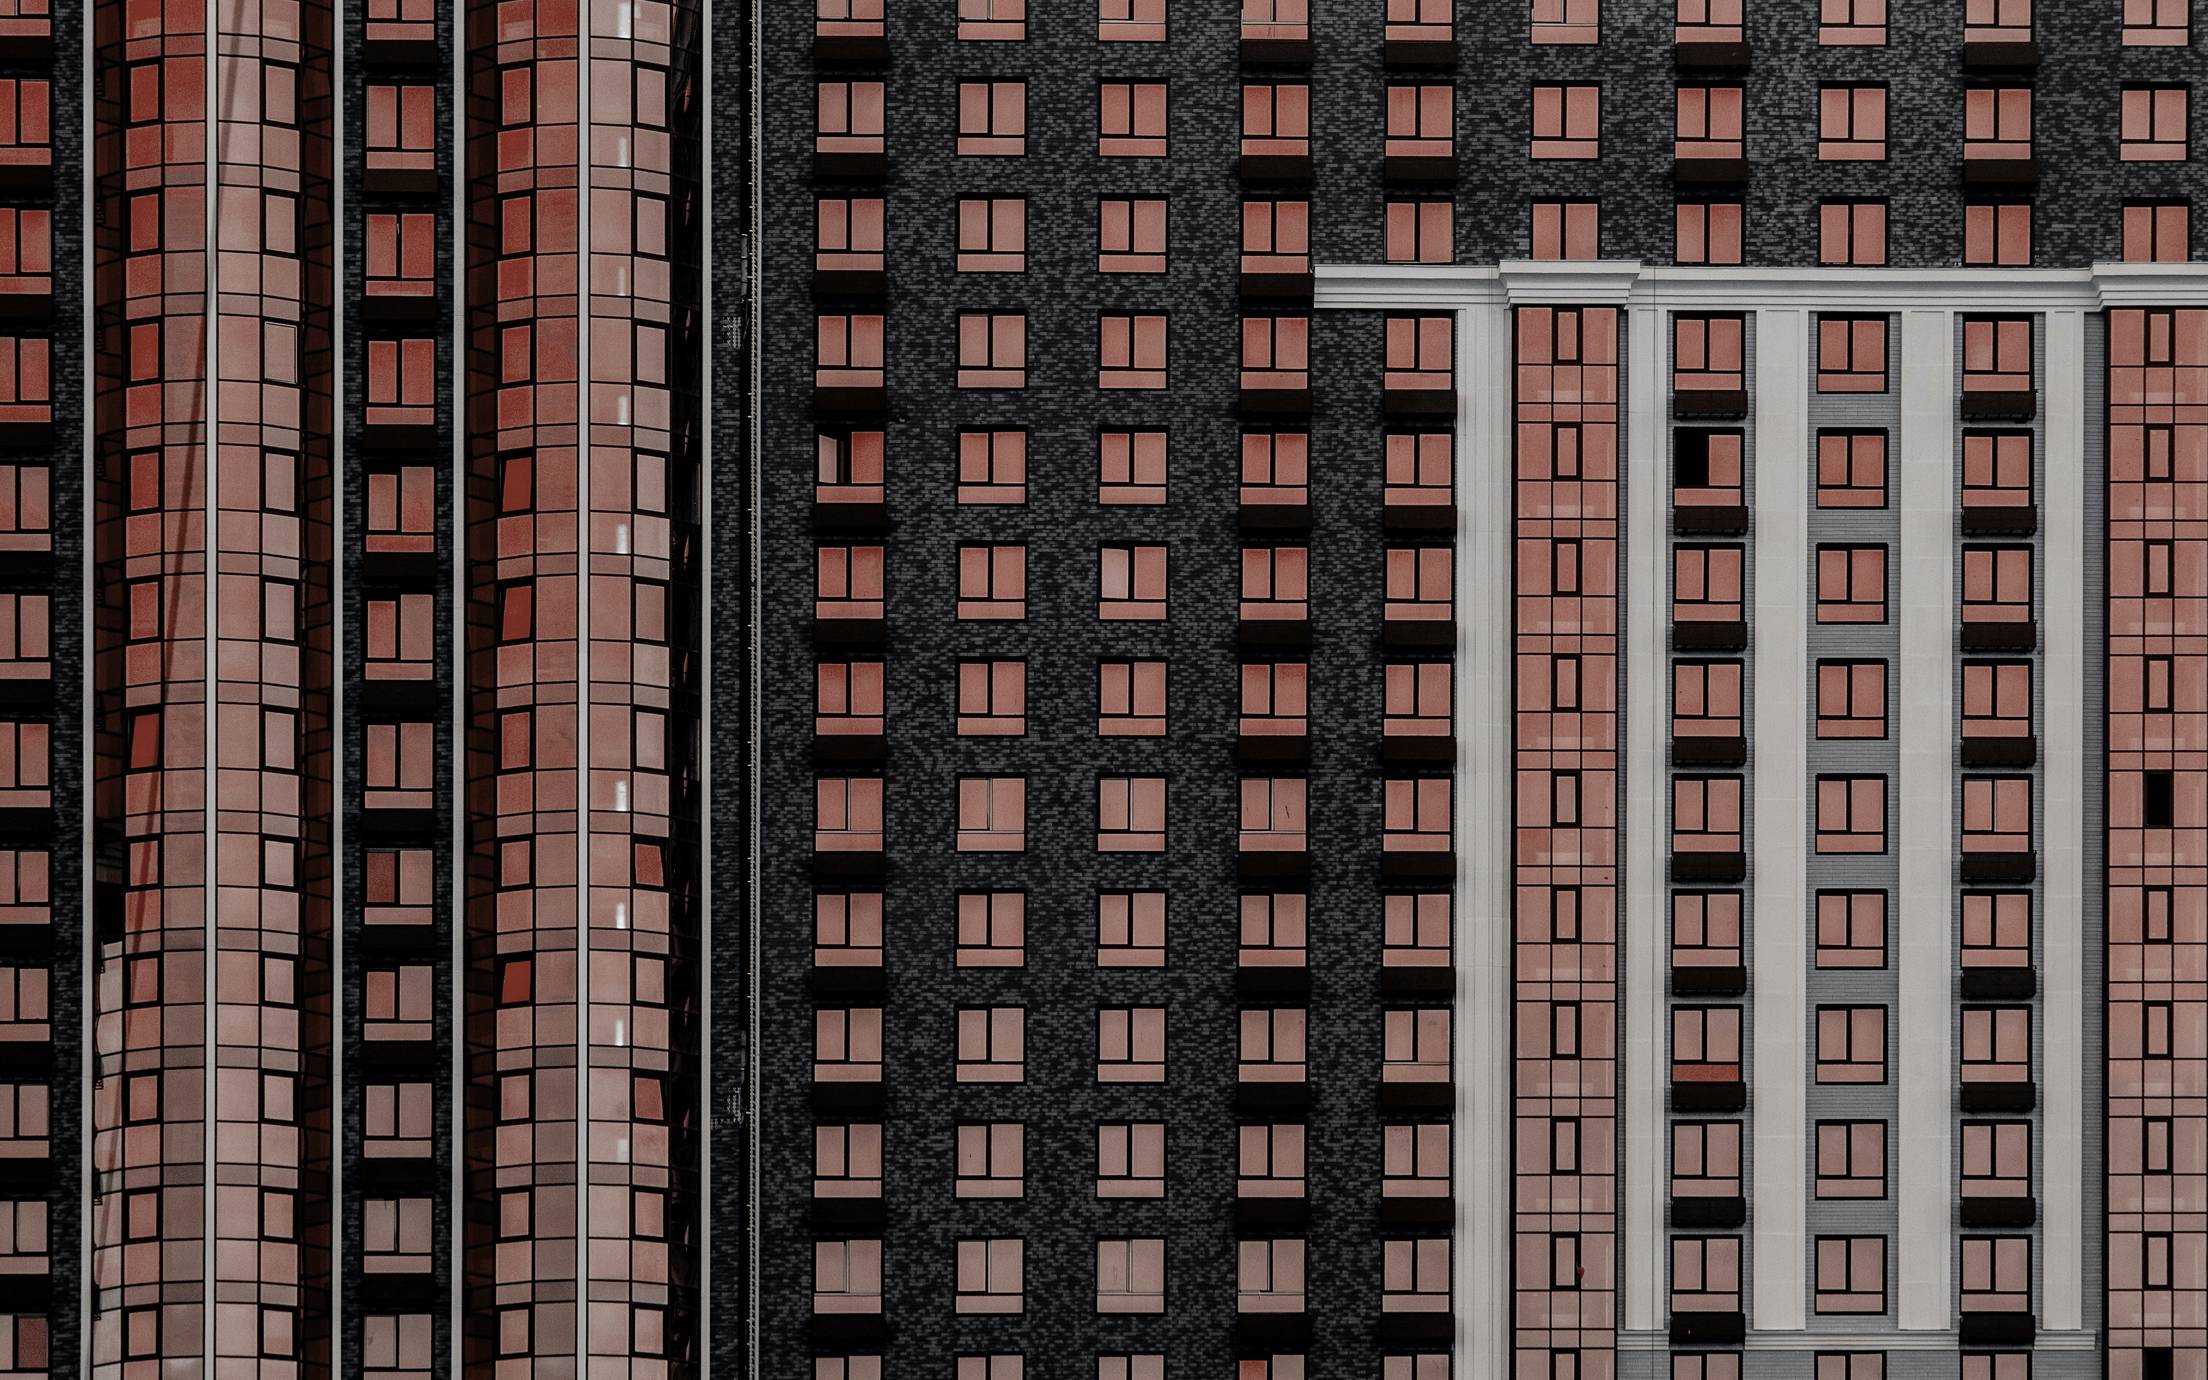 Buildings in red and black with many windows